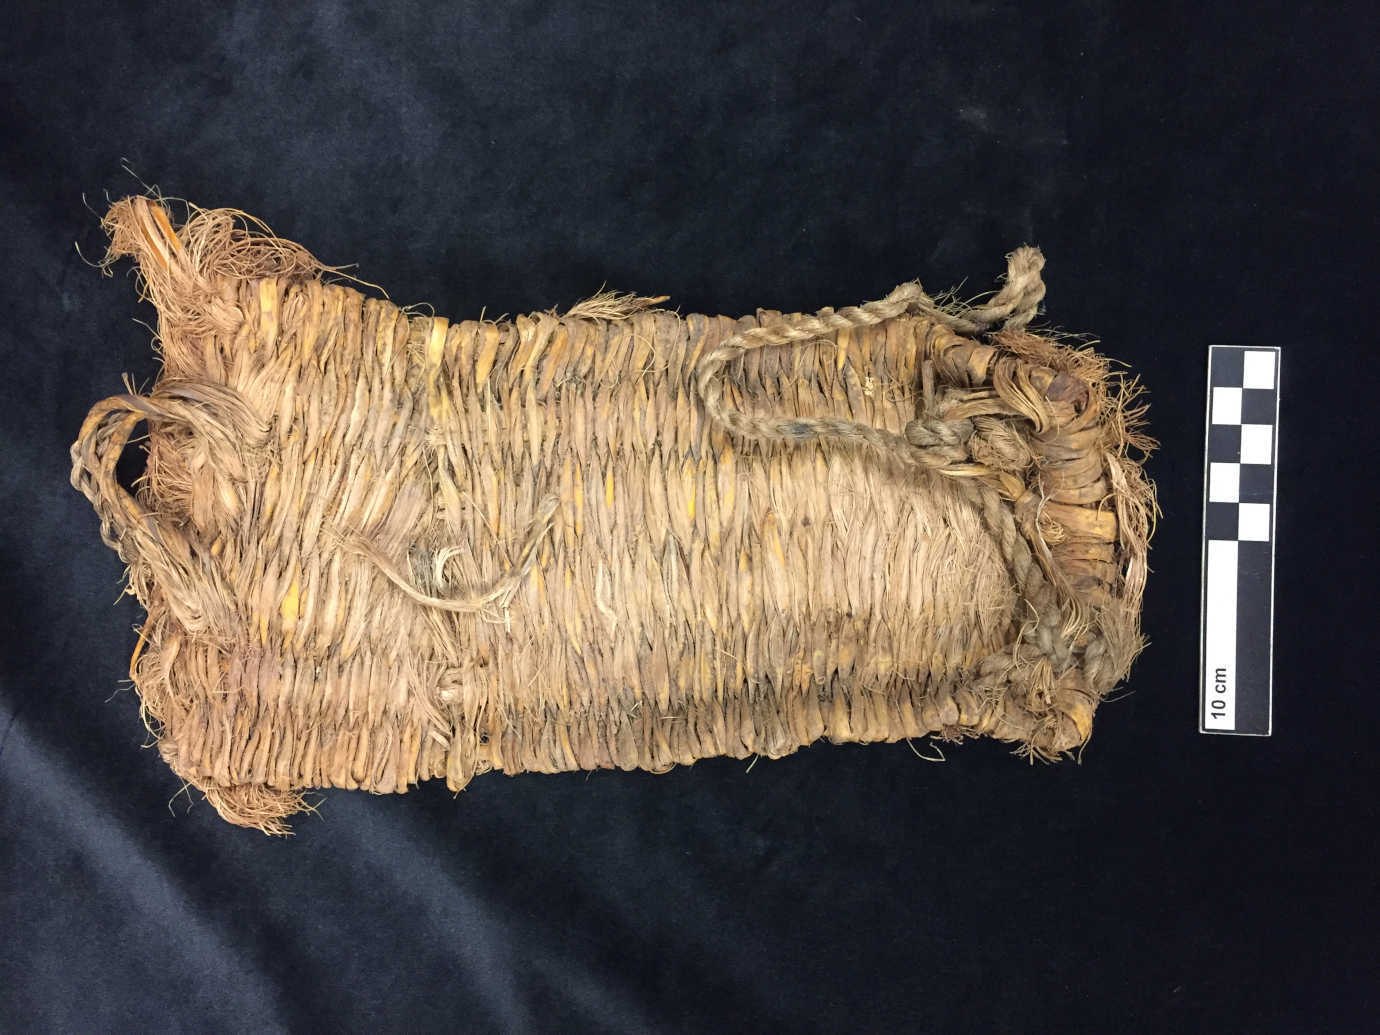 Plain weave sandal from an alcove site on Comb Ridge, west of Blanding, Utah. The sandal likely dates to the Basketmaker II period, and may be about 2000 years old. Courtesy of Bureau of Land Management, Utah and Edge of the Cedars State Park Museum.